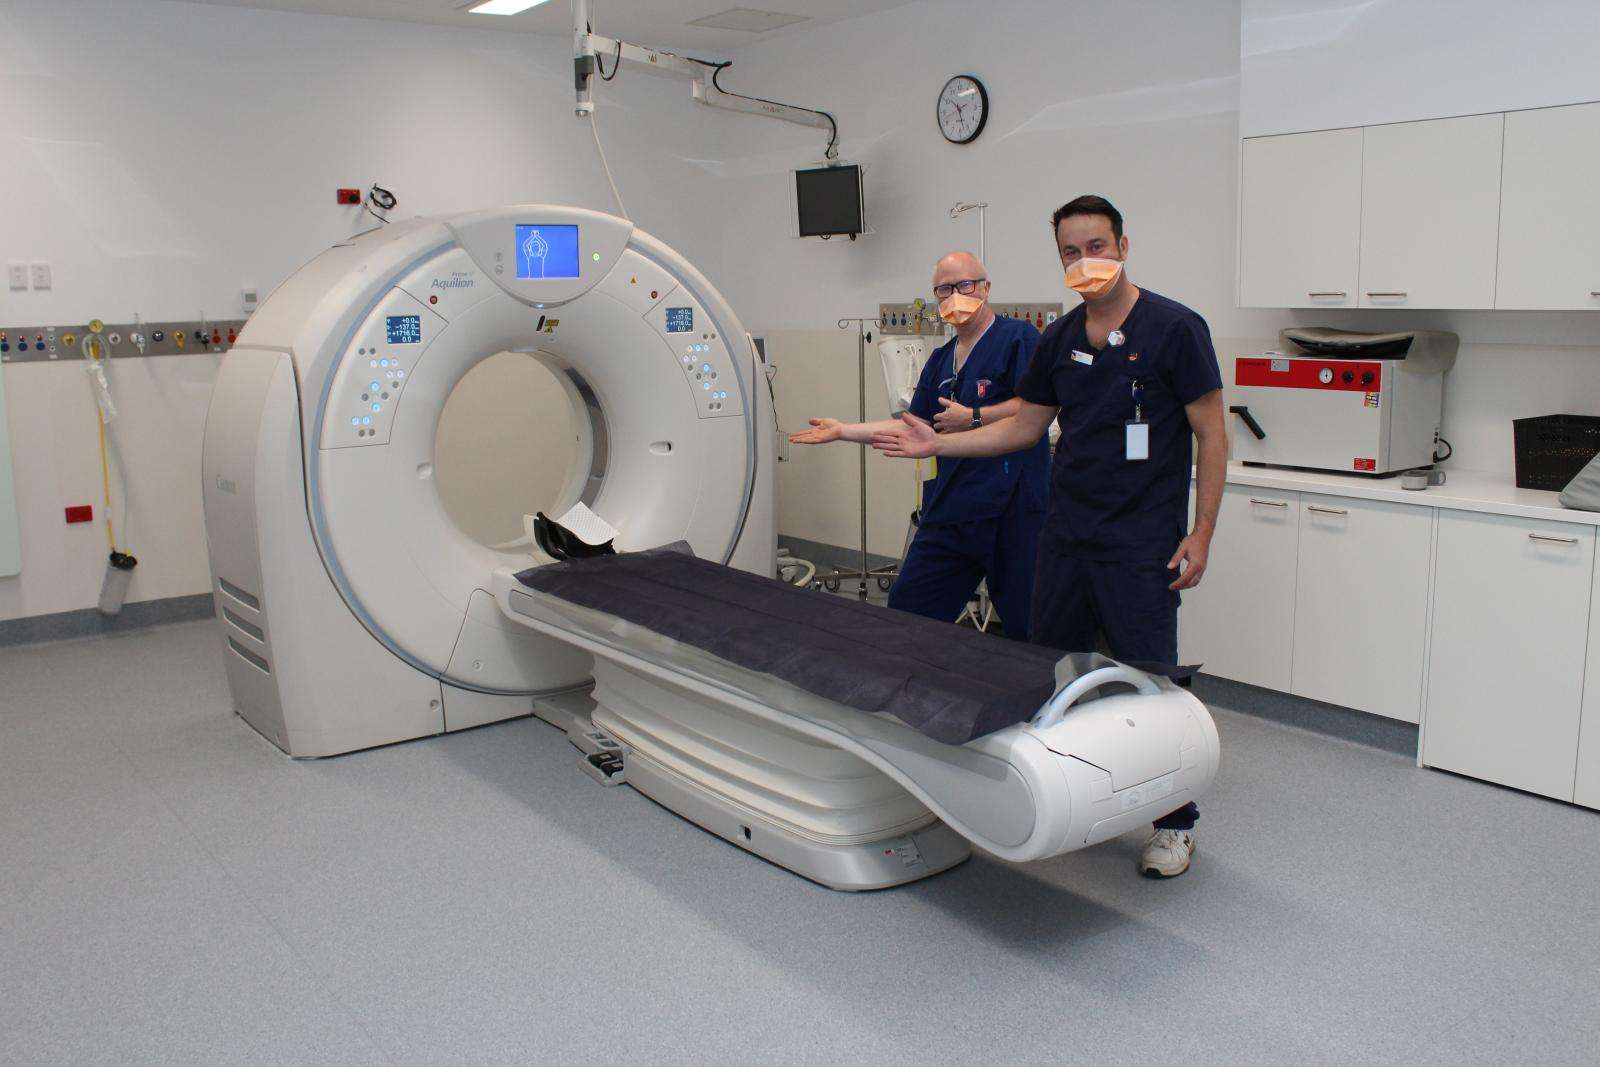 Our CT scanner is now operating from the new Radiology department within the new hospital at Wonthaggi.